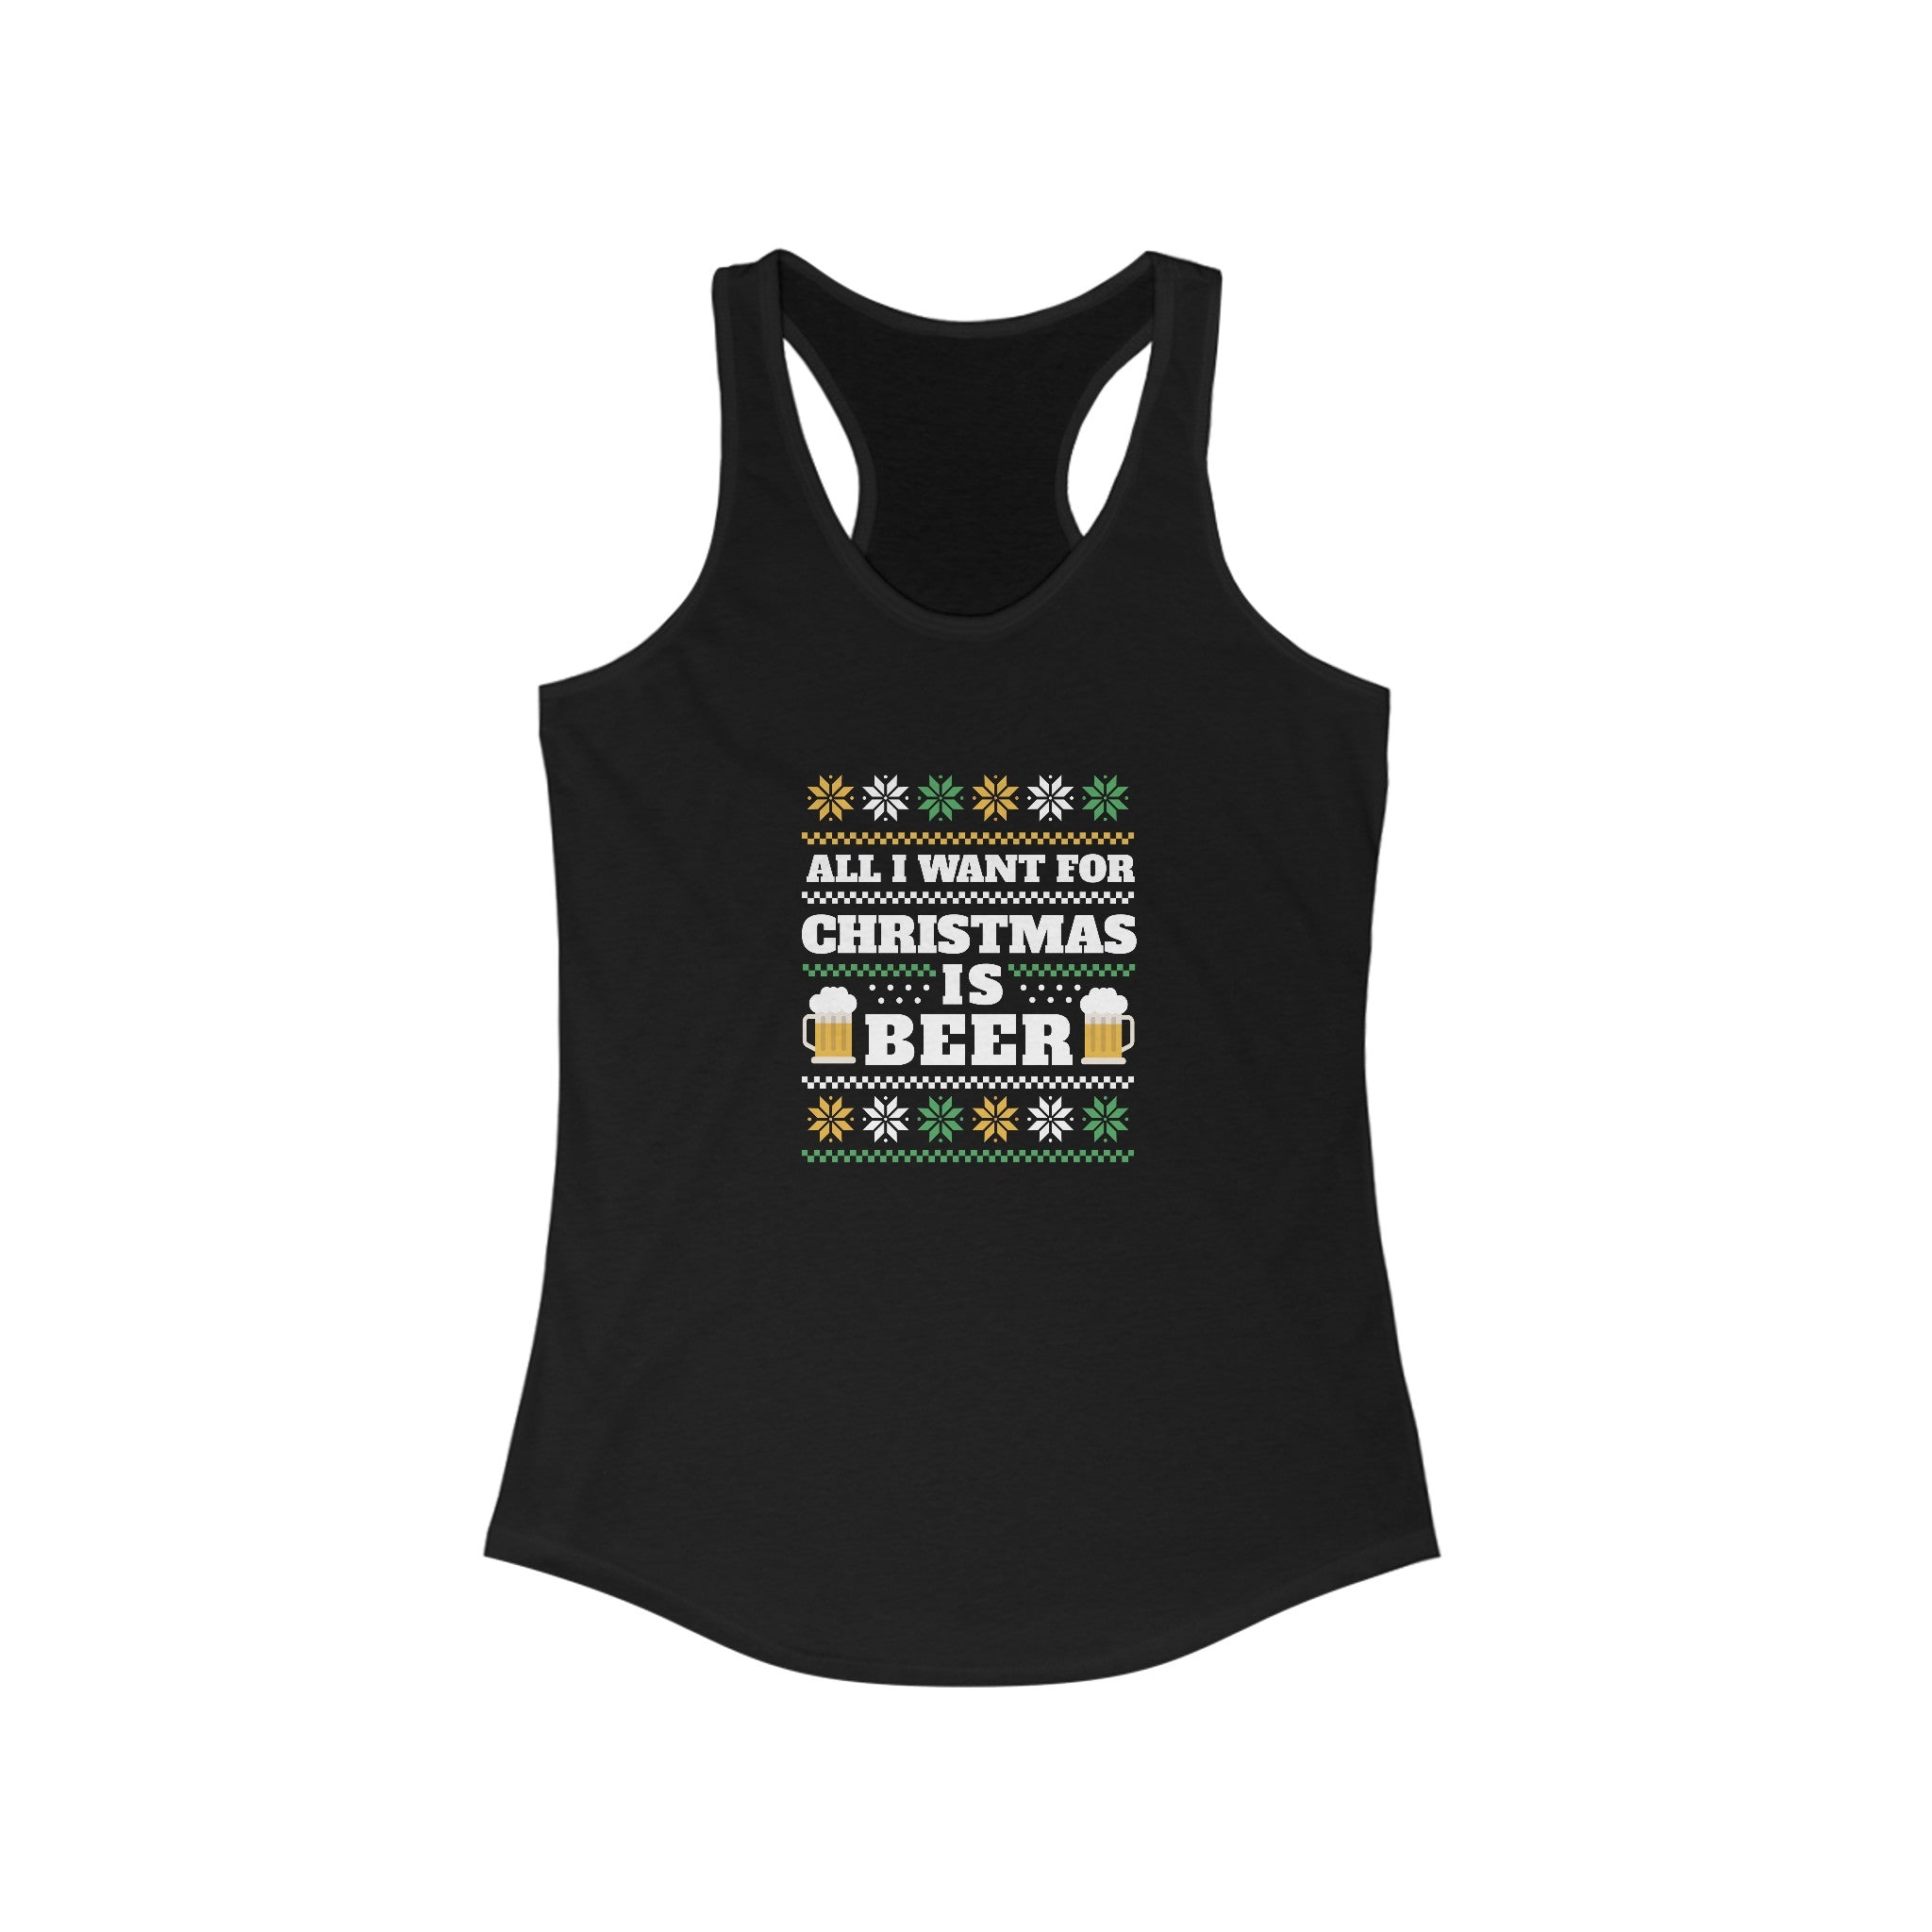 A Beer Ugly Sweater - Women's Racerback Tank with a festive beer ugly sweater design featuring the text "All I want for Christmas is Beer" and images of beer mugs and holiday patterns, perfect for an active lifestyle this holiday season.